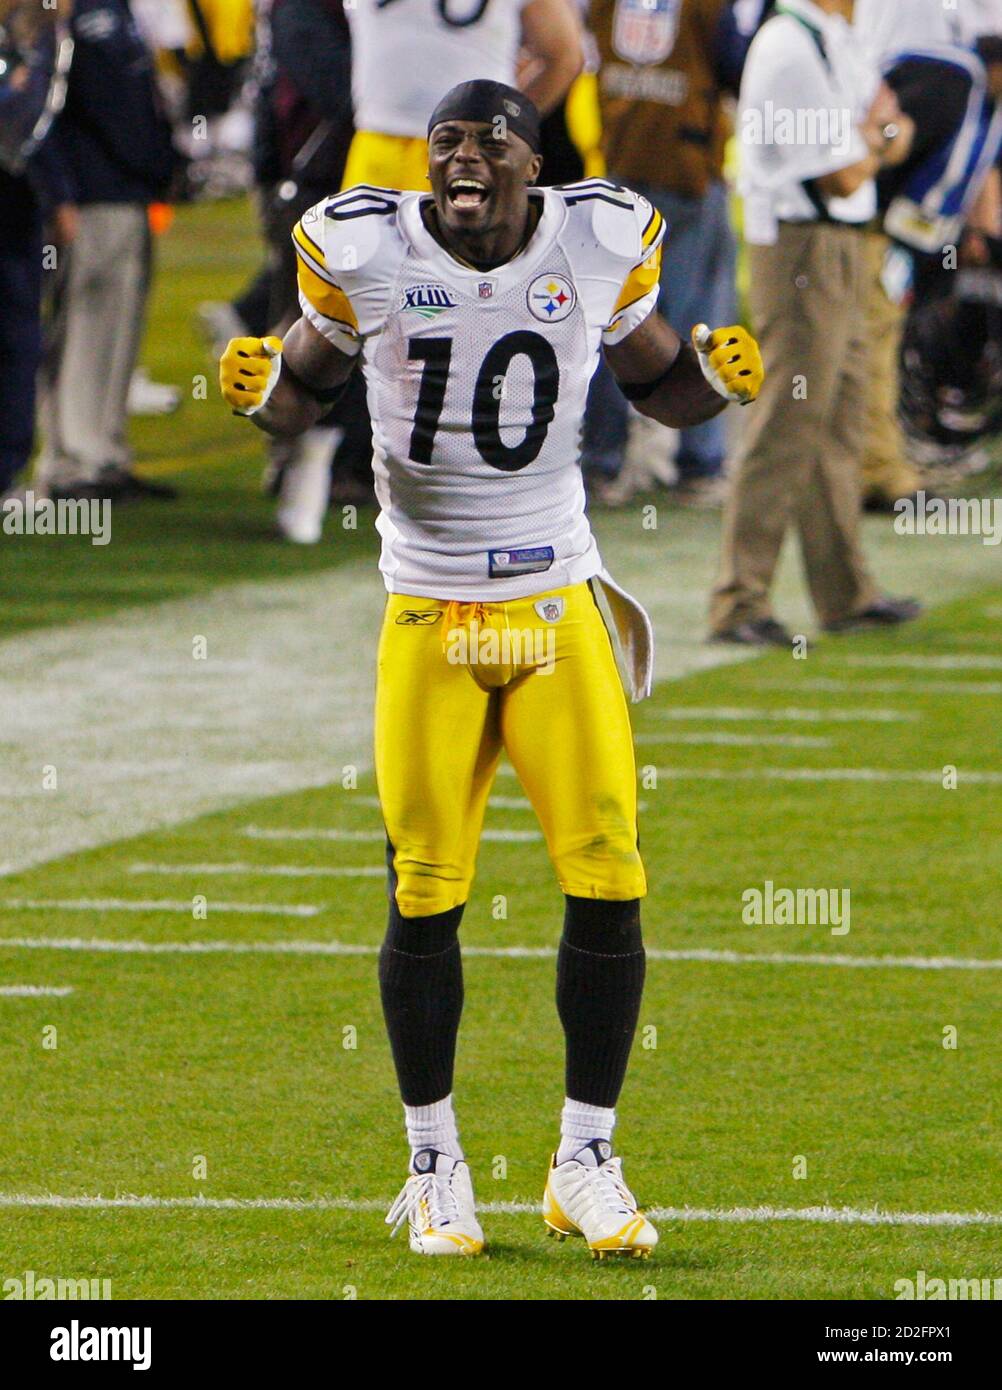 Super Bowl MVP Pittsburgh Steelers' Santonio Holmes celebrates after the  Steelers defeated the Arizona Cardinals in the NFL's Super Bowl XLIII  football game in Tampa, Florida, February 1, 2009. REUTERS/Brian Snyder  (UNITED